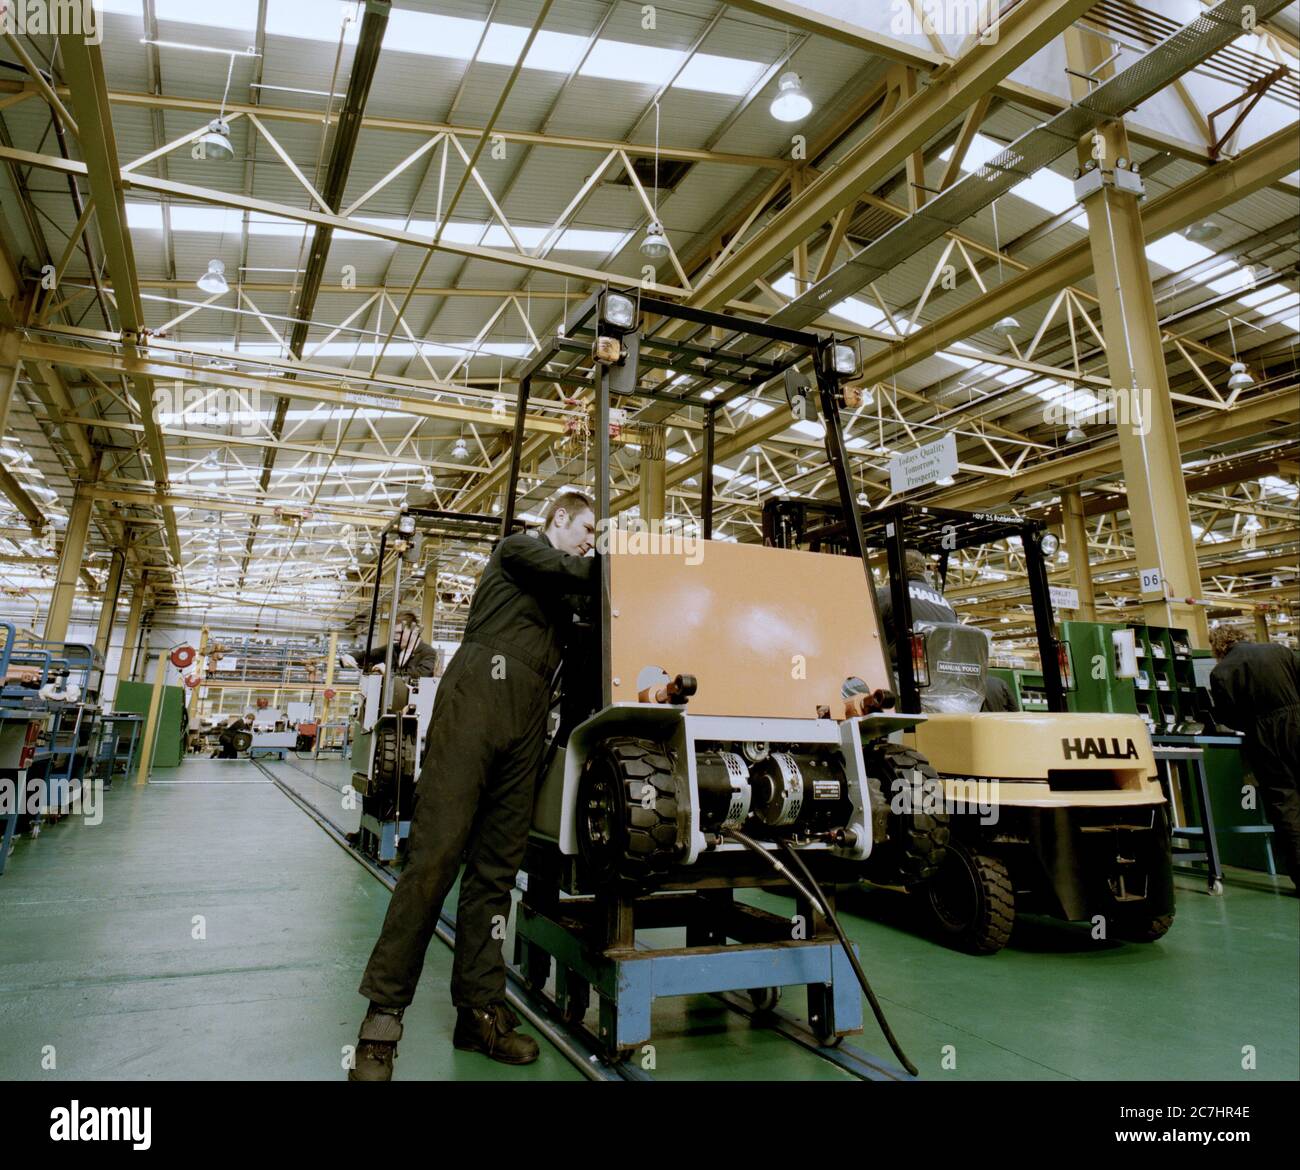 Fork Lift Truck Production Line Stock Photo